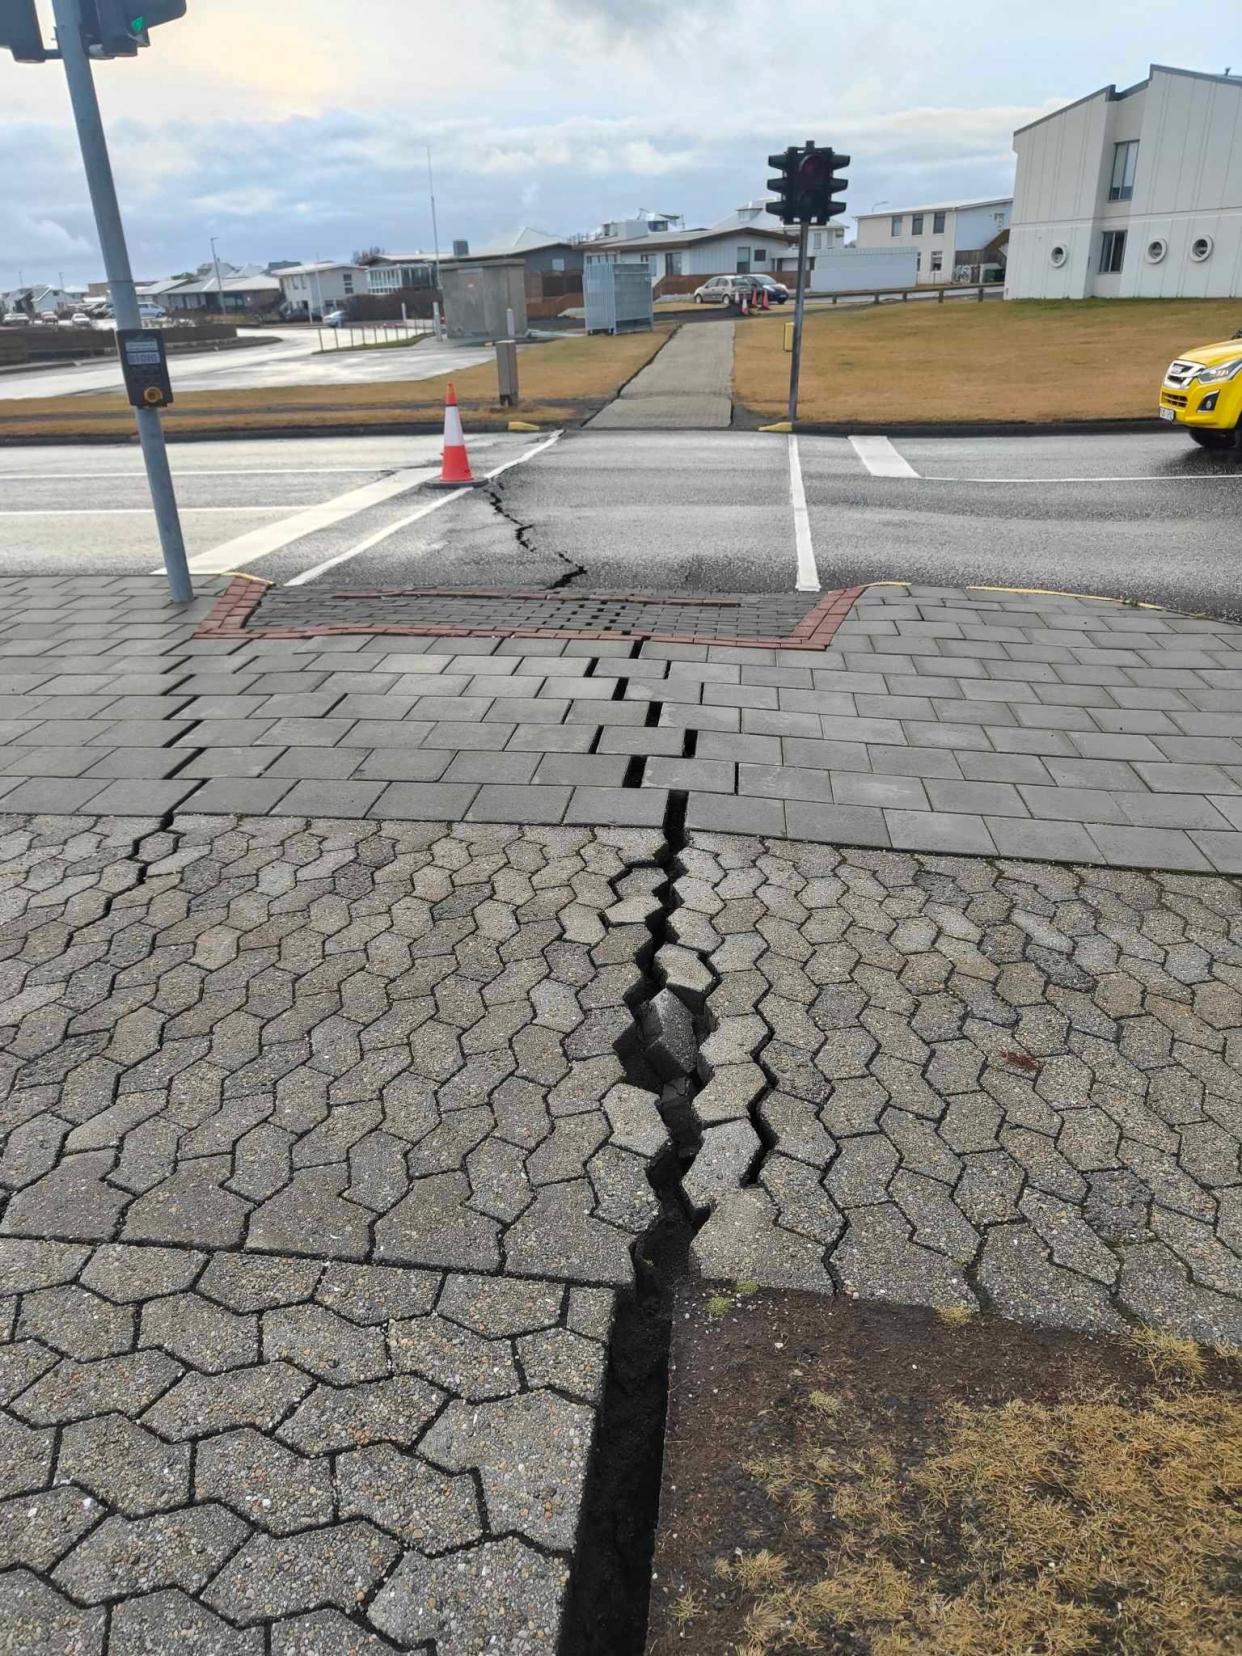 Cracks emerge on a road due to the volcanic activity in Grindavik (via REUTERS)